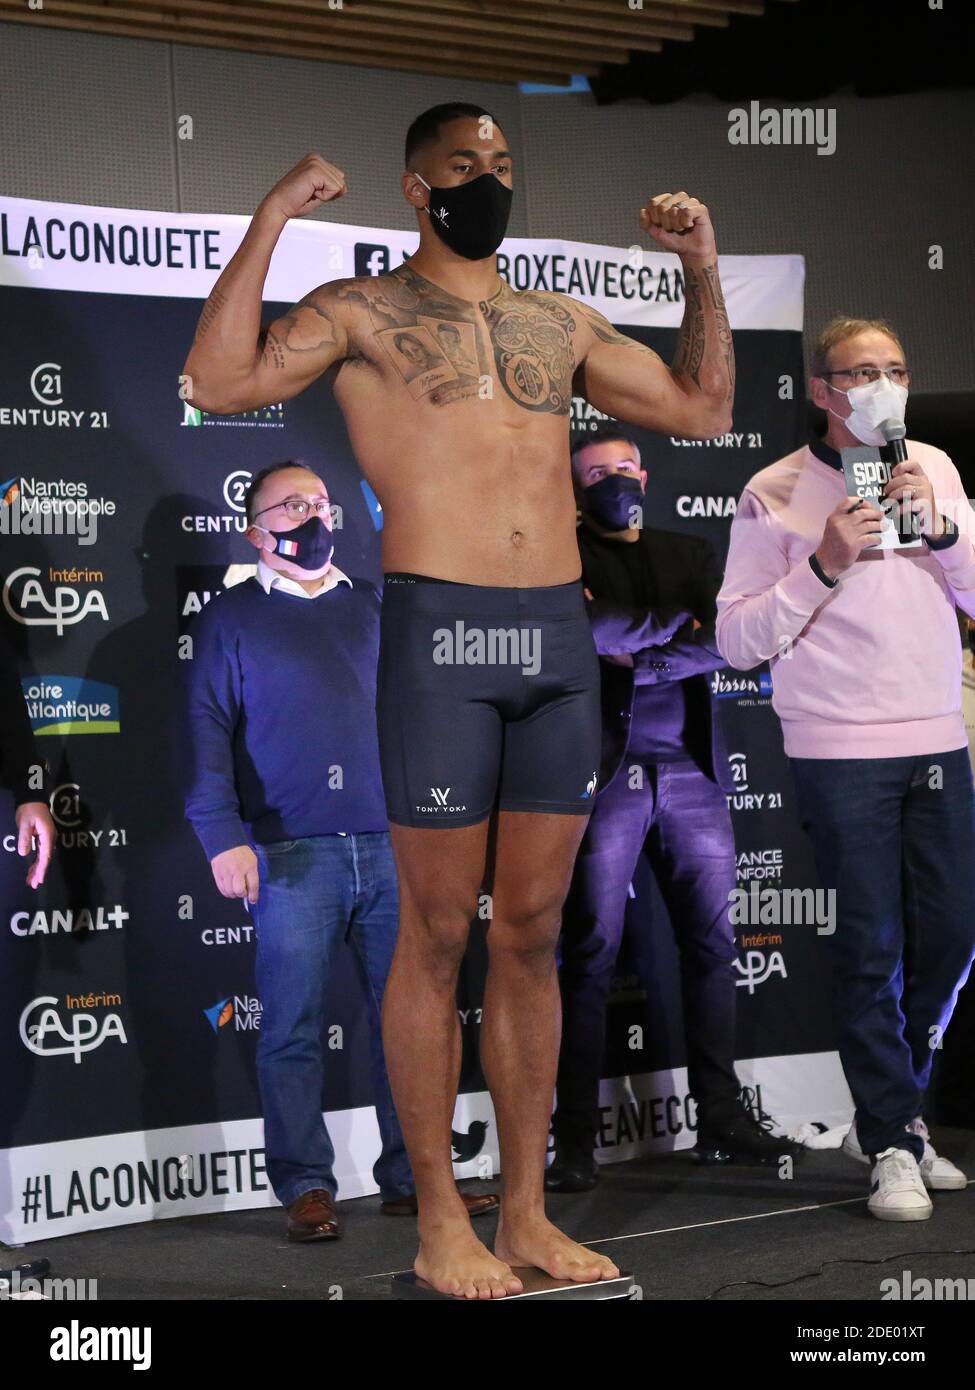 Tony Yoka of French during the official weighing and press conference  before the heavyweight boxing bout between Tony Yoka (FRA) and Christian  Hammer (GER) on November 26, 2020 at the H Arena